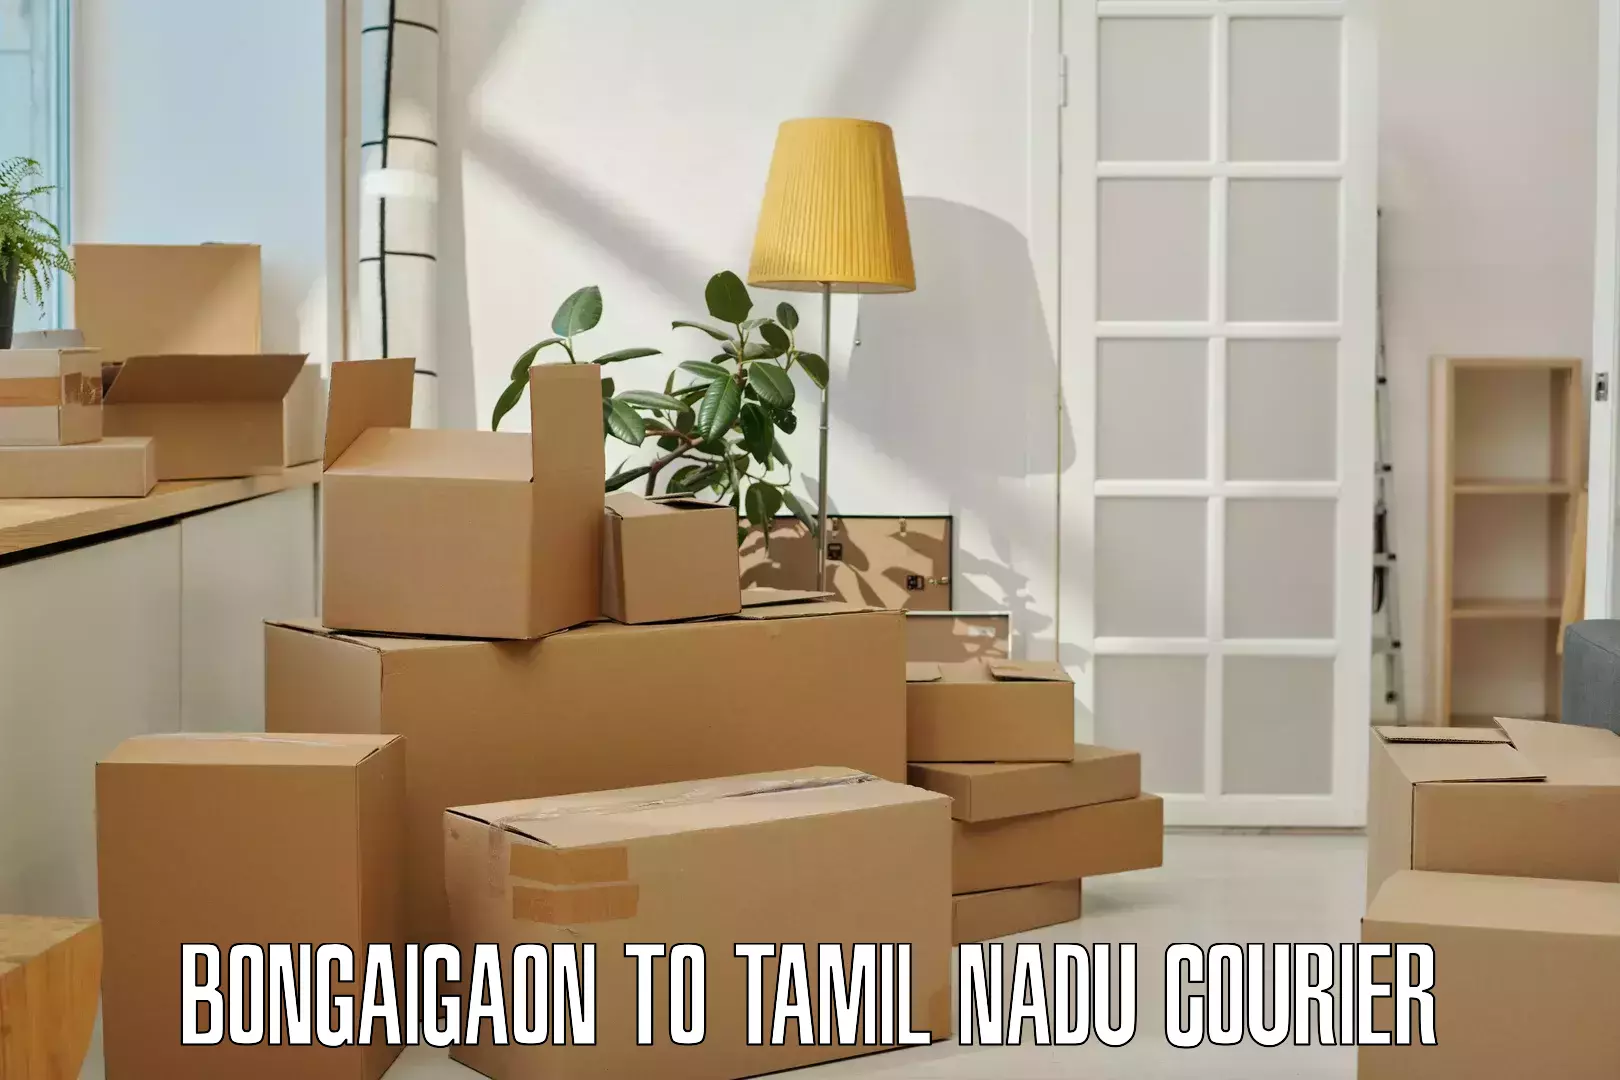 24-hour courier services Bongaigaon to Tamil Nadu